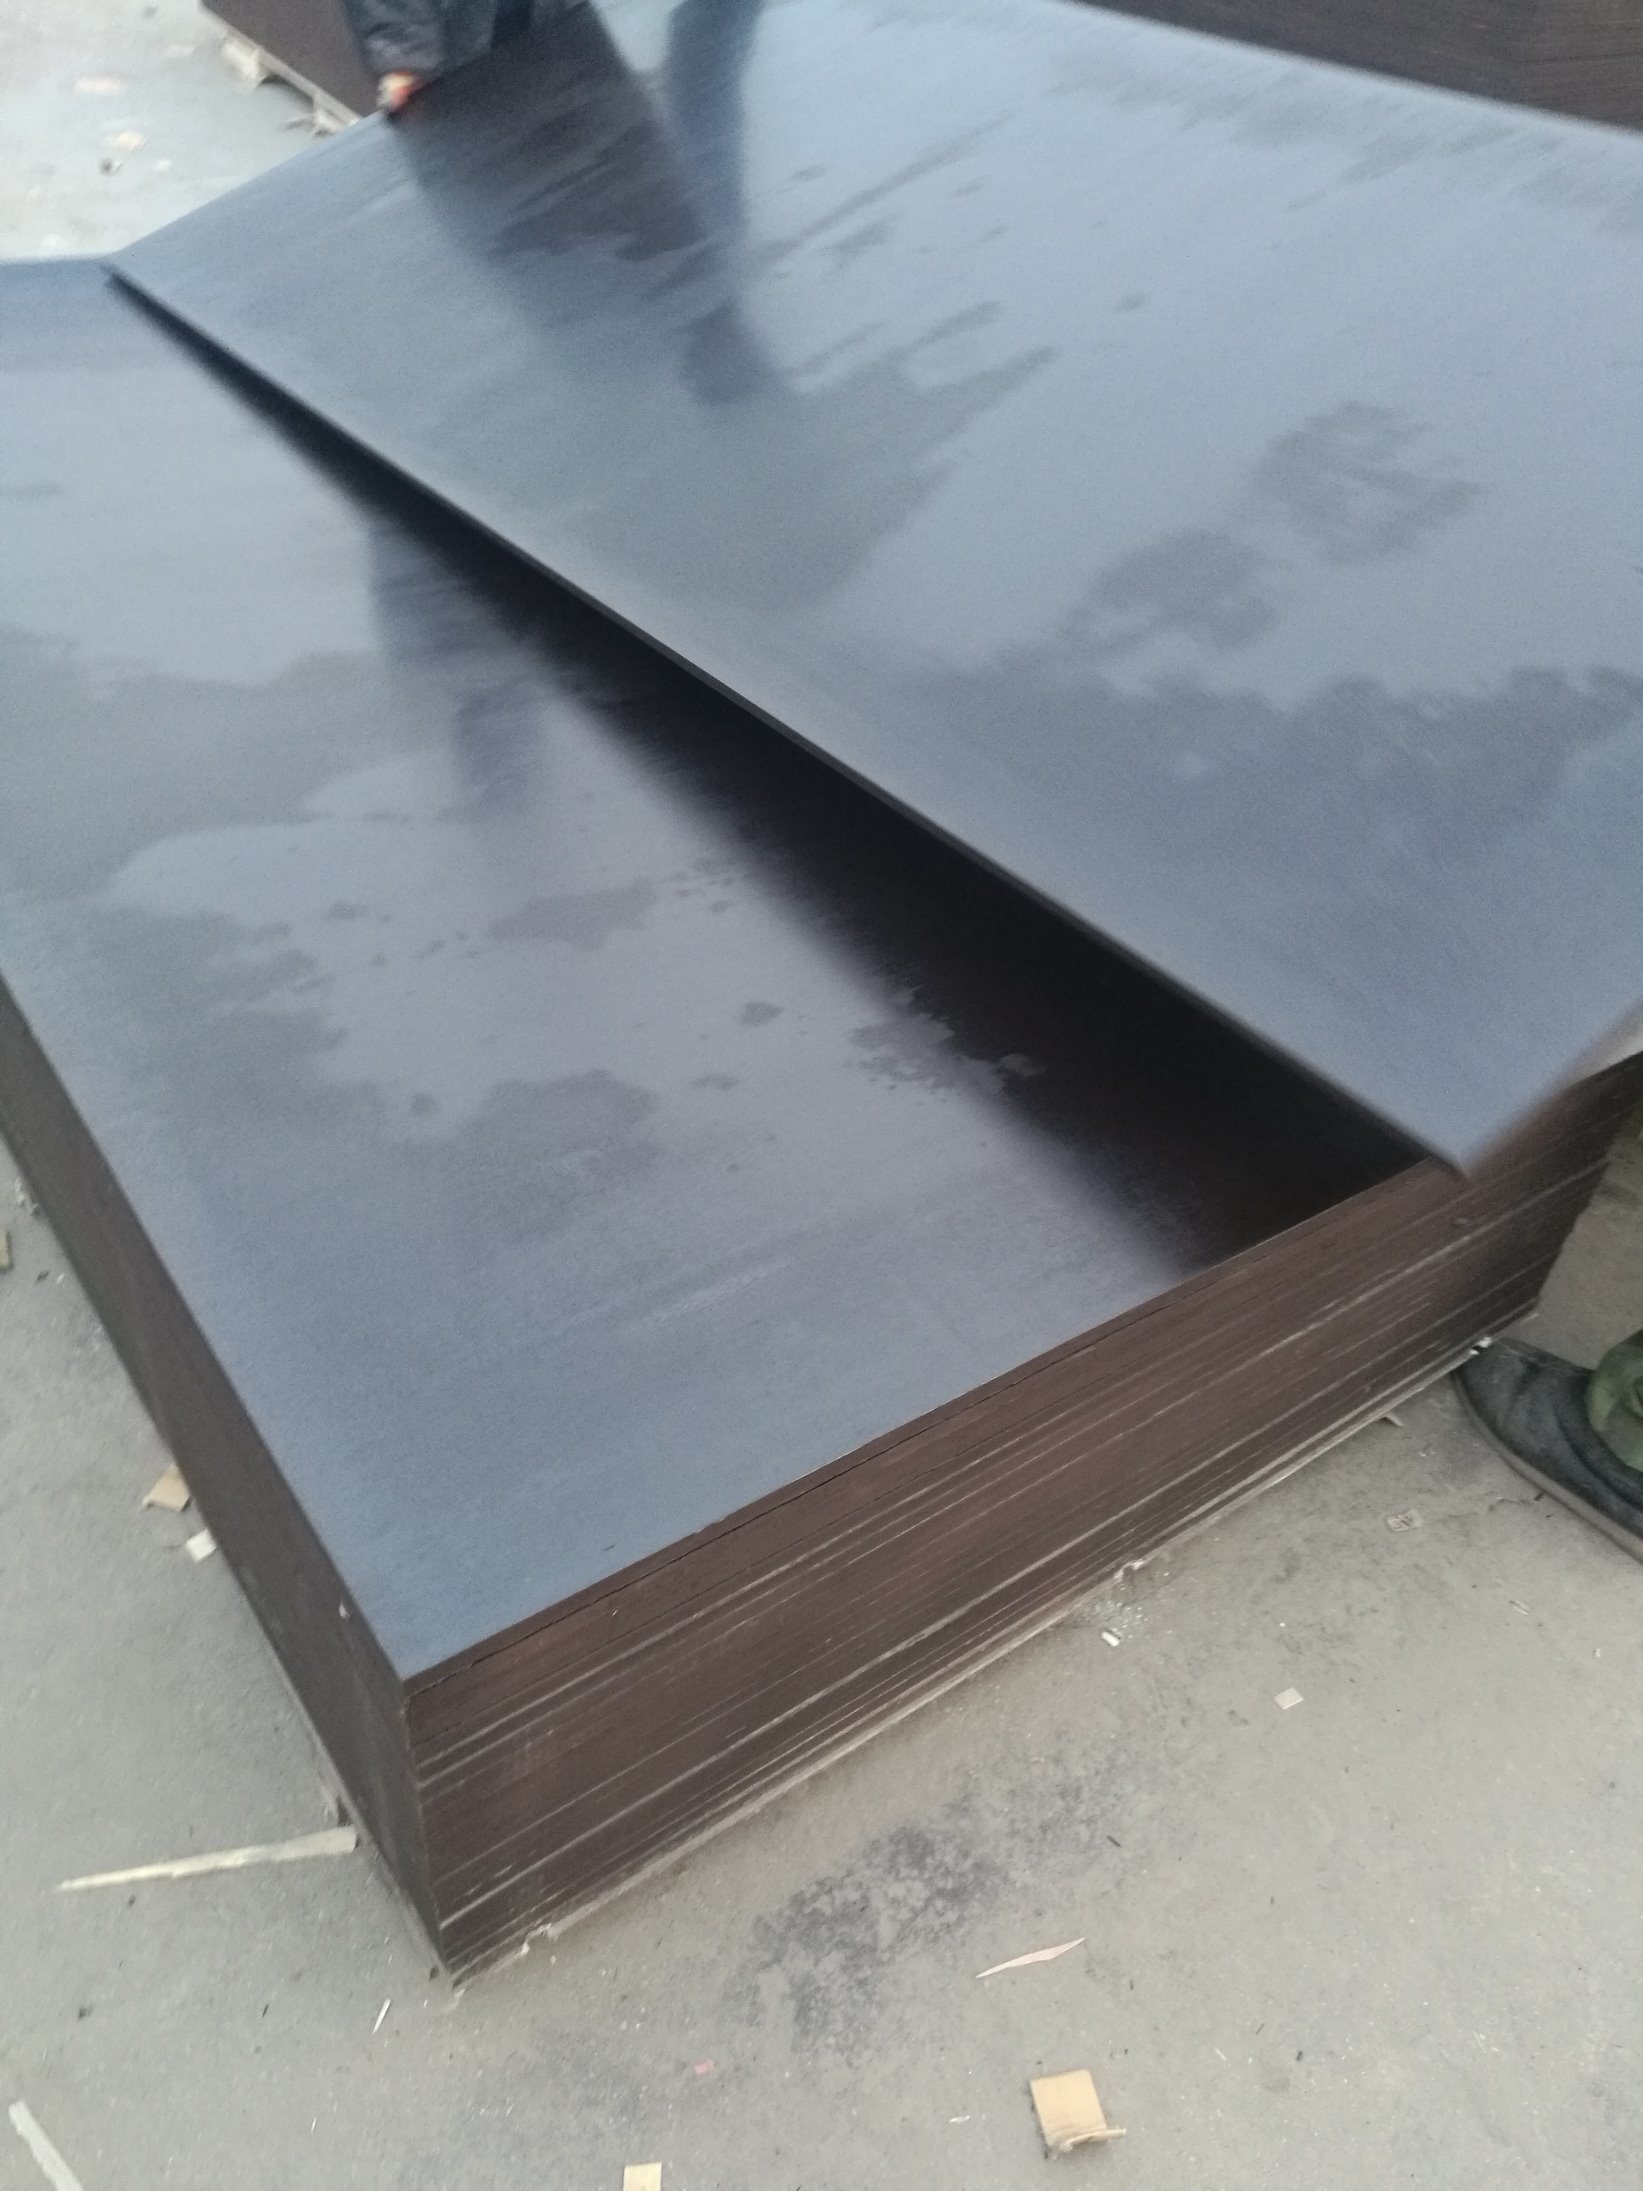 Good Quality Building Materials Usded for Shuttering- Film Faced Plywood